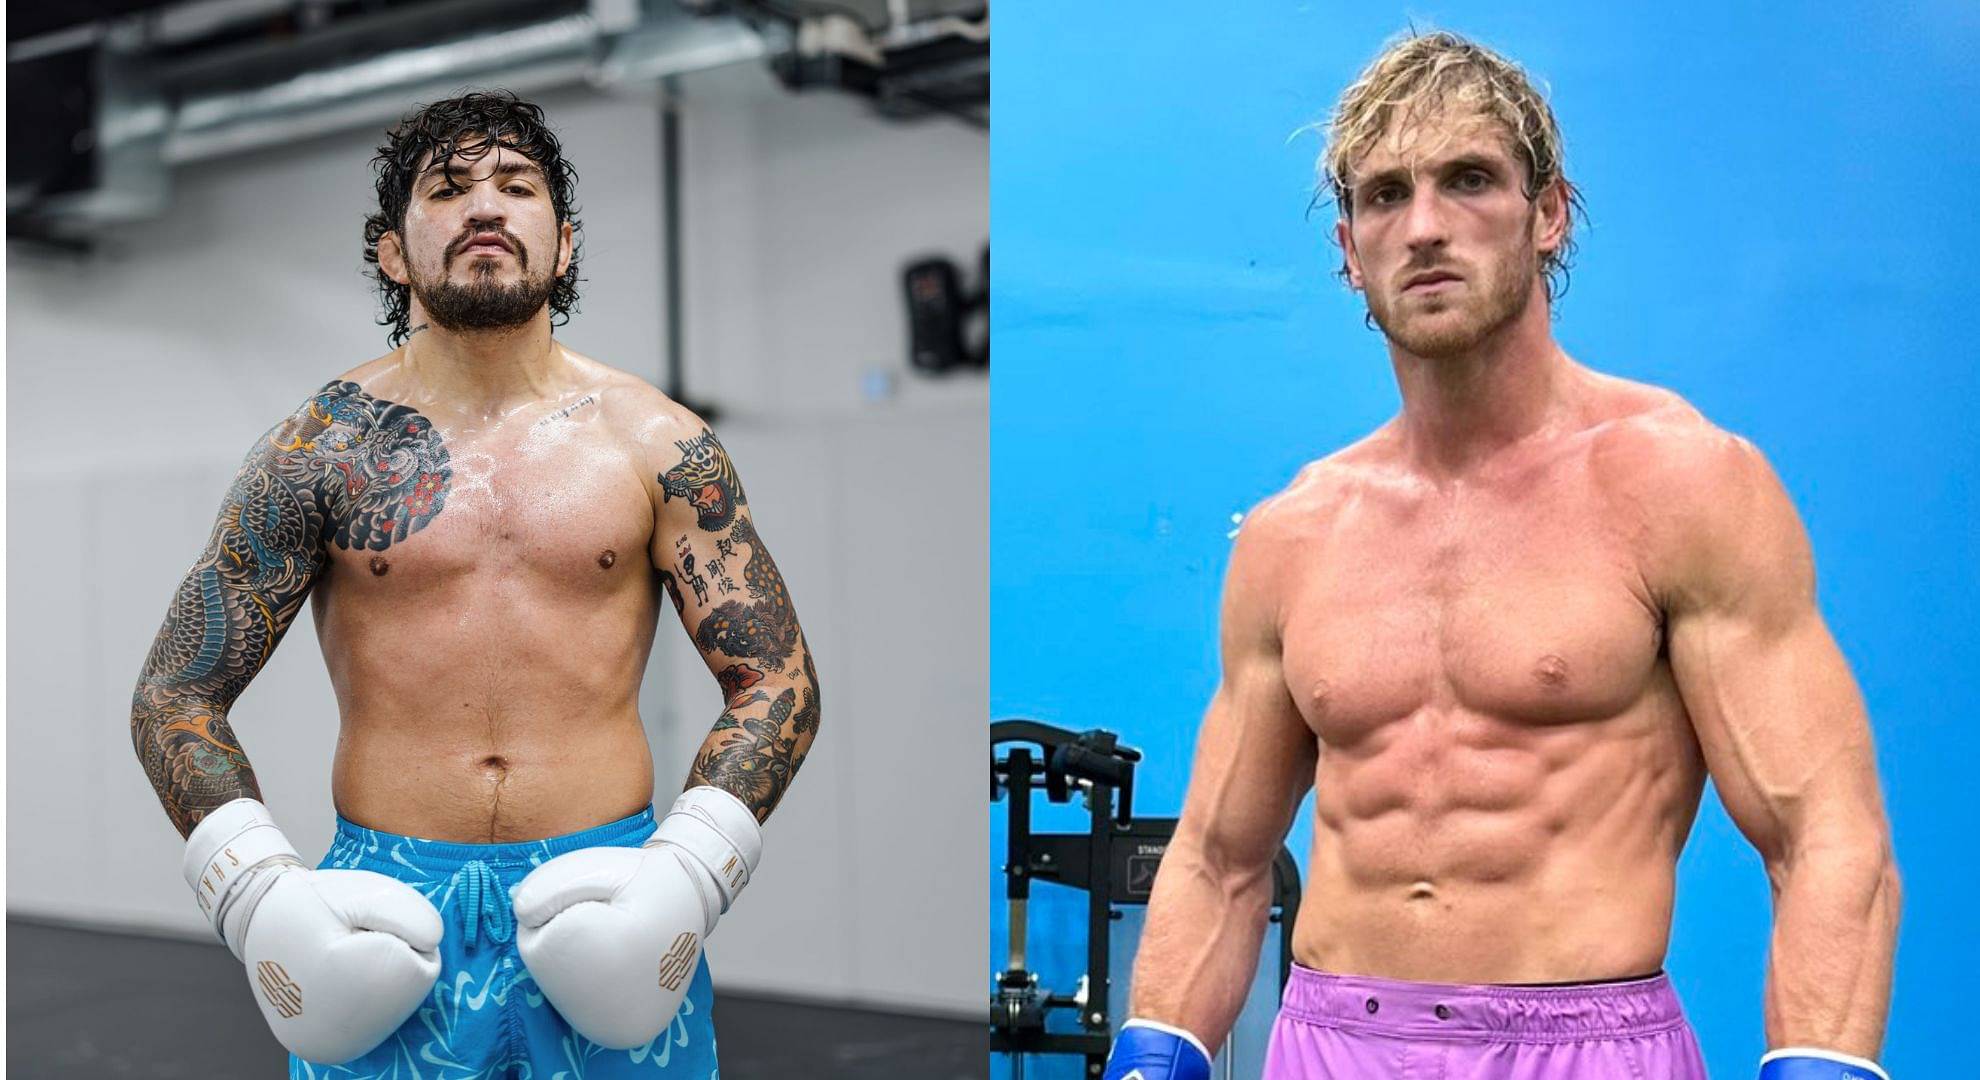 Logan Paul claims that he has footage of Dillon Danis incriminating himself of a federal crime